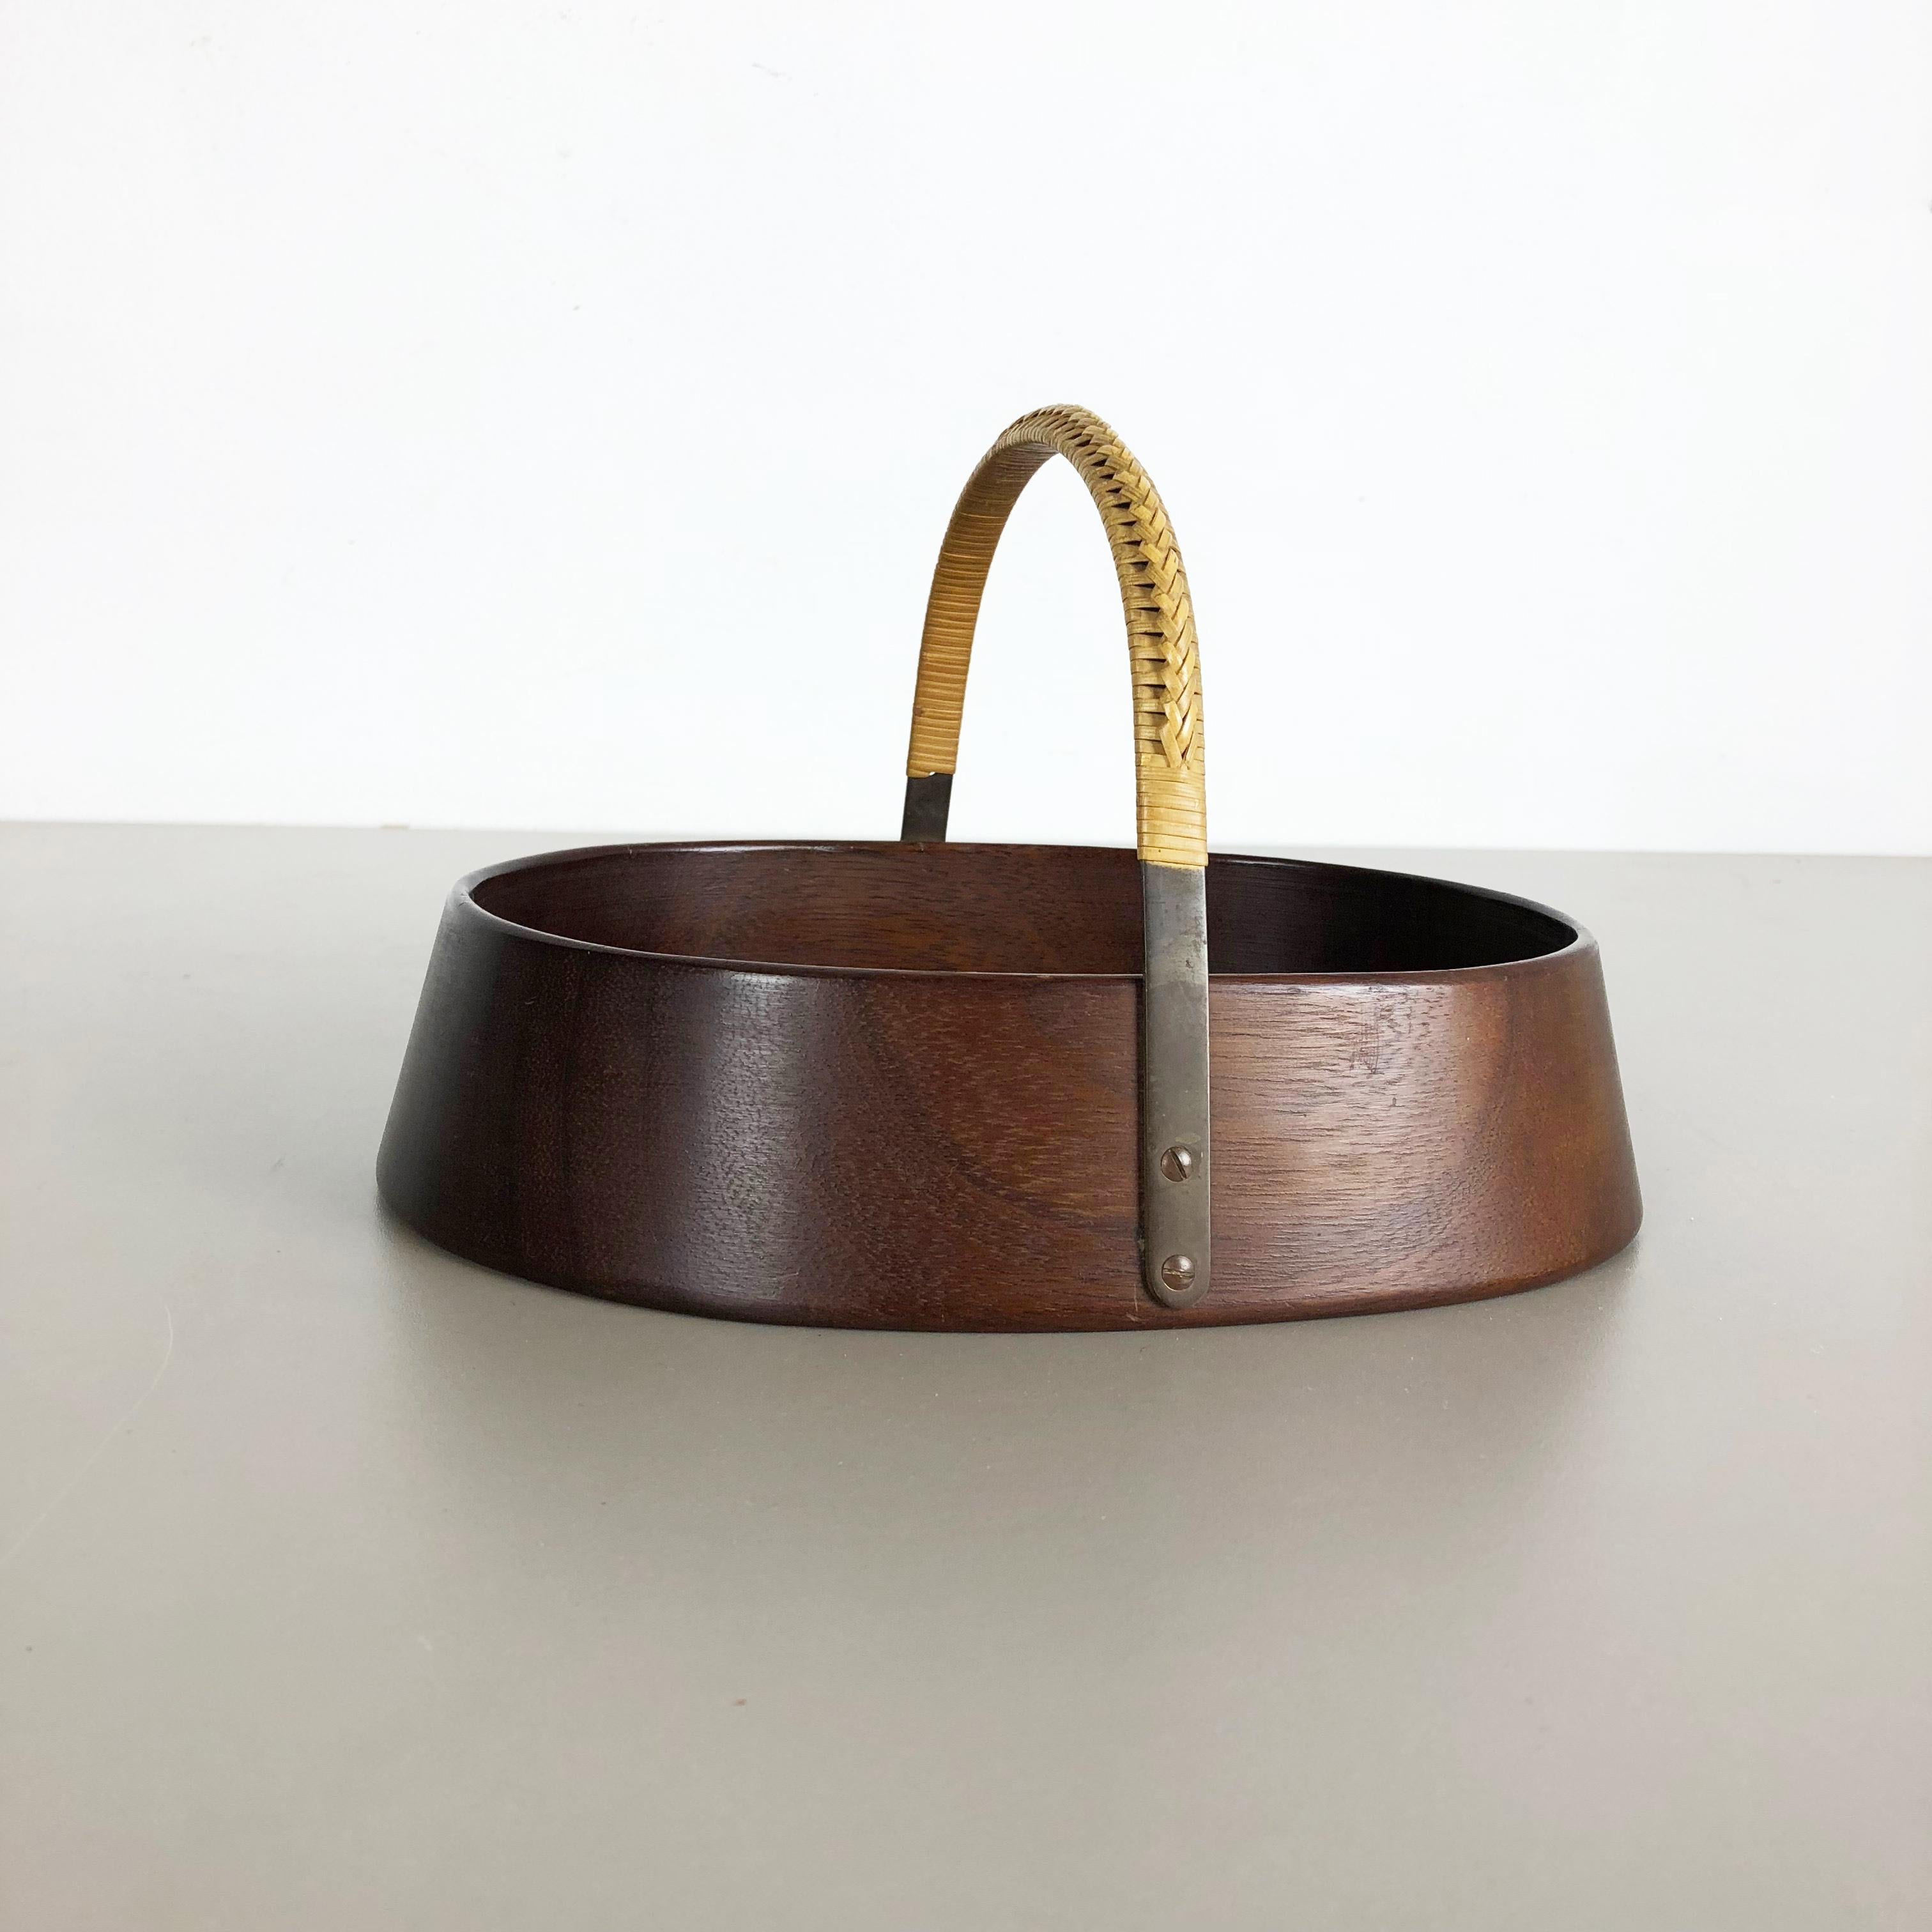 Mid-Century Modern Large Teak Bowl with Brass and Rattan Handle by Carl Auböck, Austria, 1950s